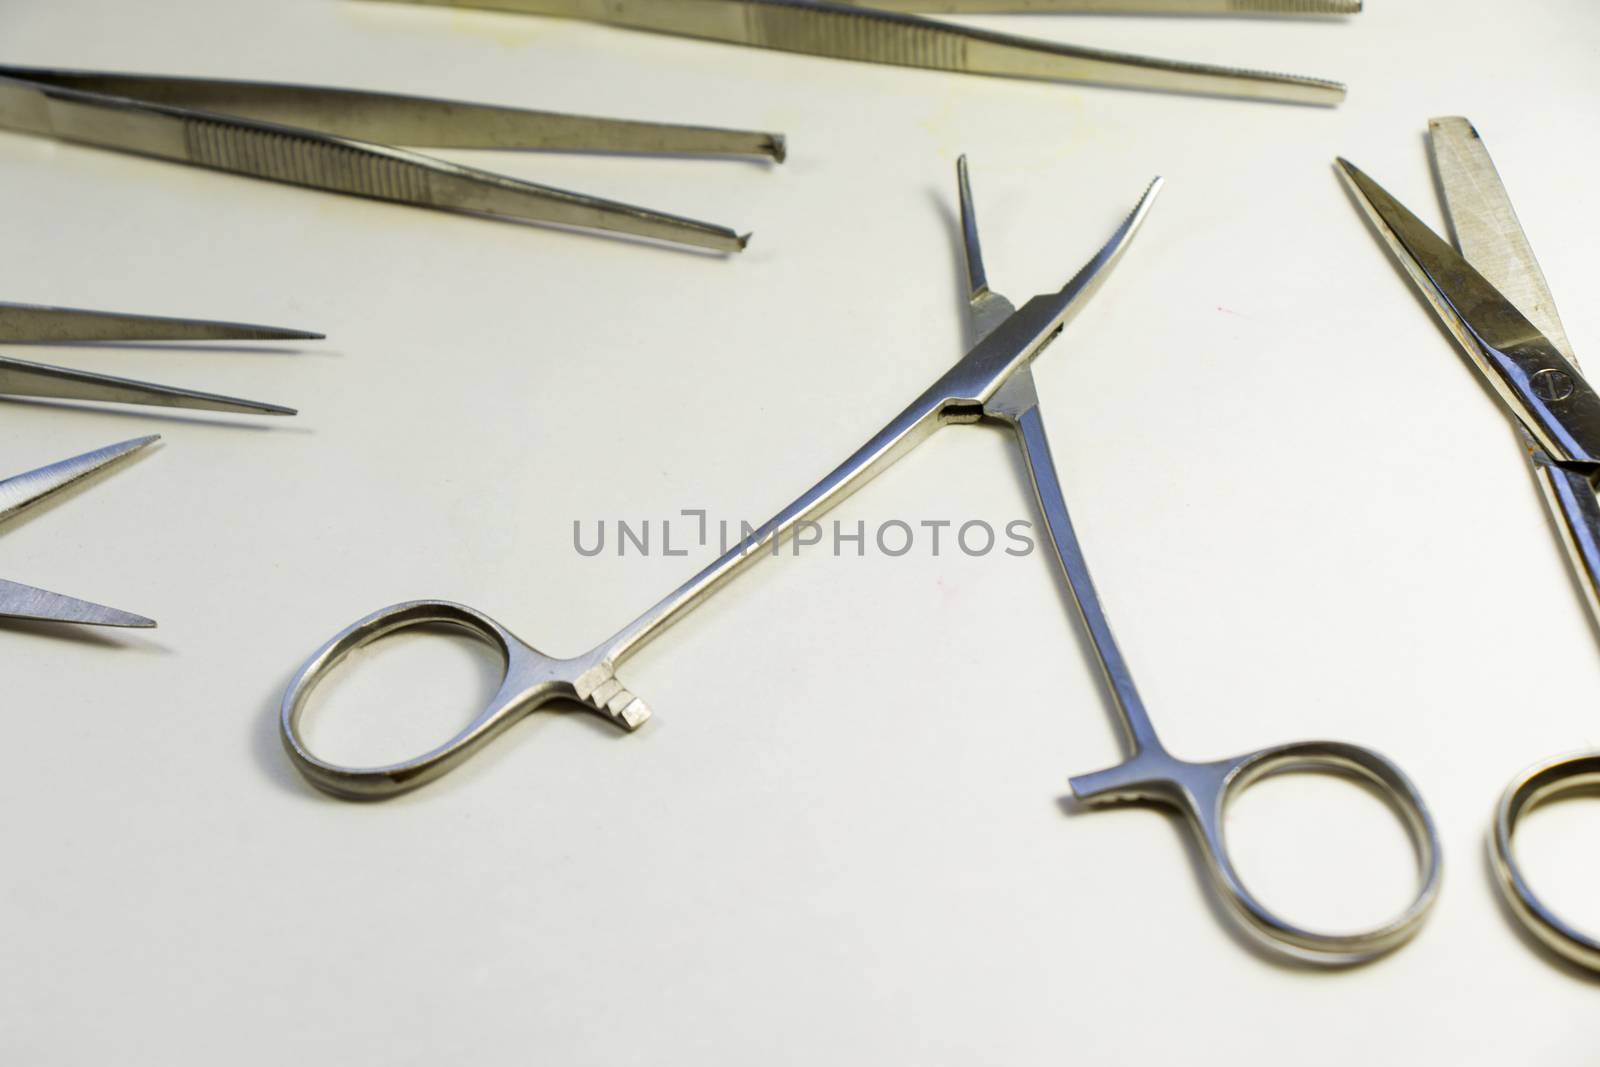 Dissection Kit - Premium Quality Stainless Steel Tools for Medical Students of Anatomy. Surgery instruments. Operation scissors. by Taidundua